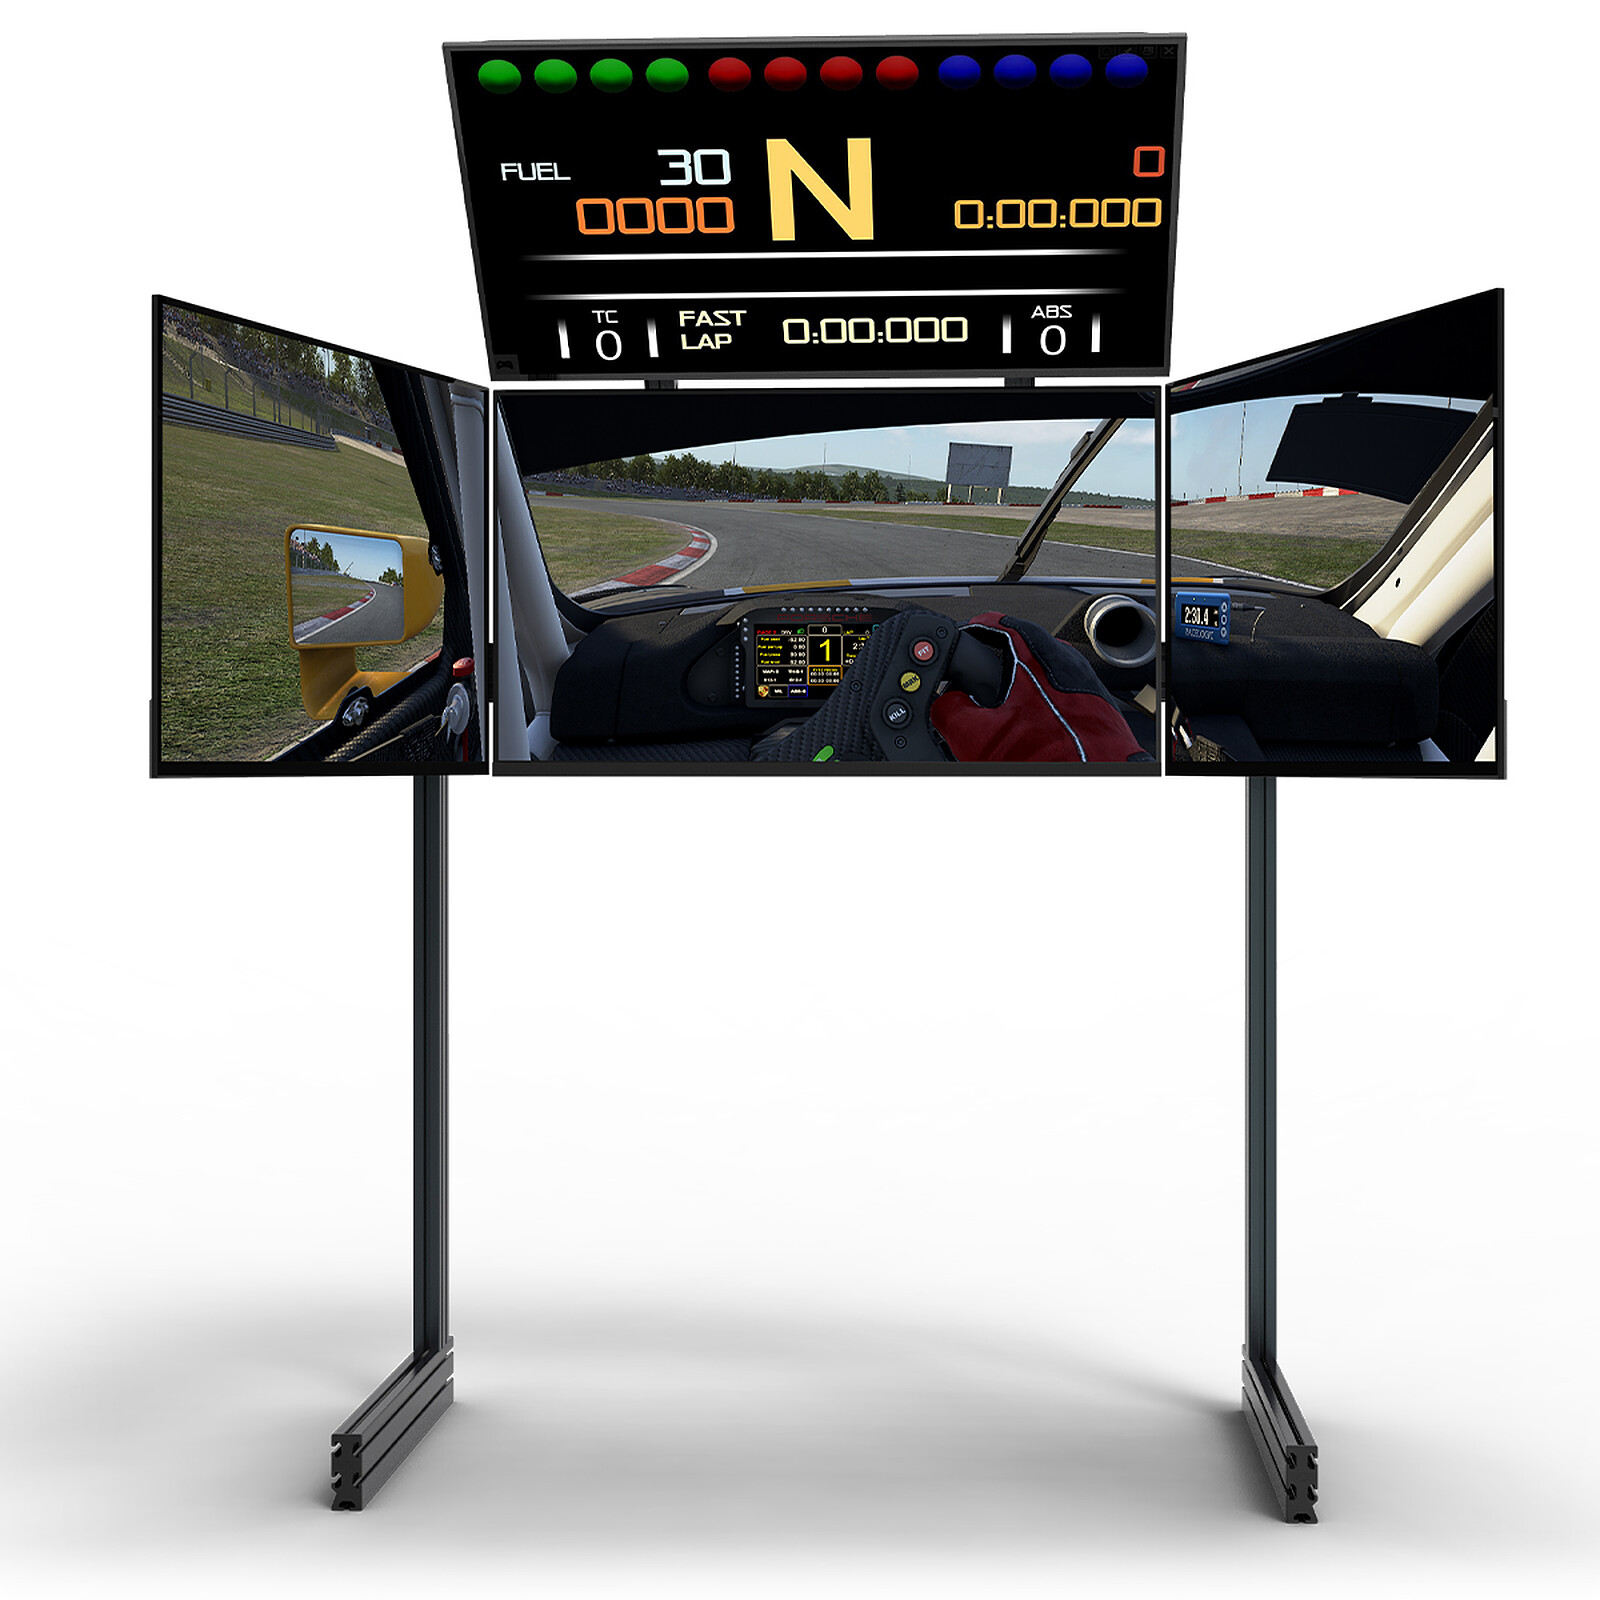 Next Level Racing Free Standing Keyboard & Mouse Stand - Autres accessoires  jeu - Garantie 3 ans LDLC